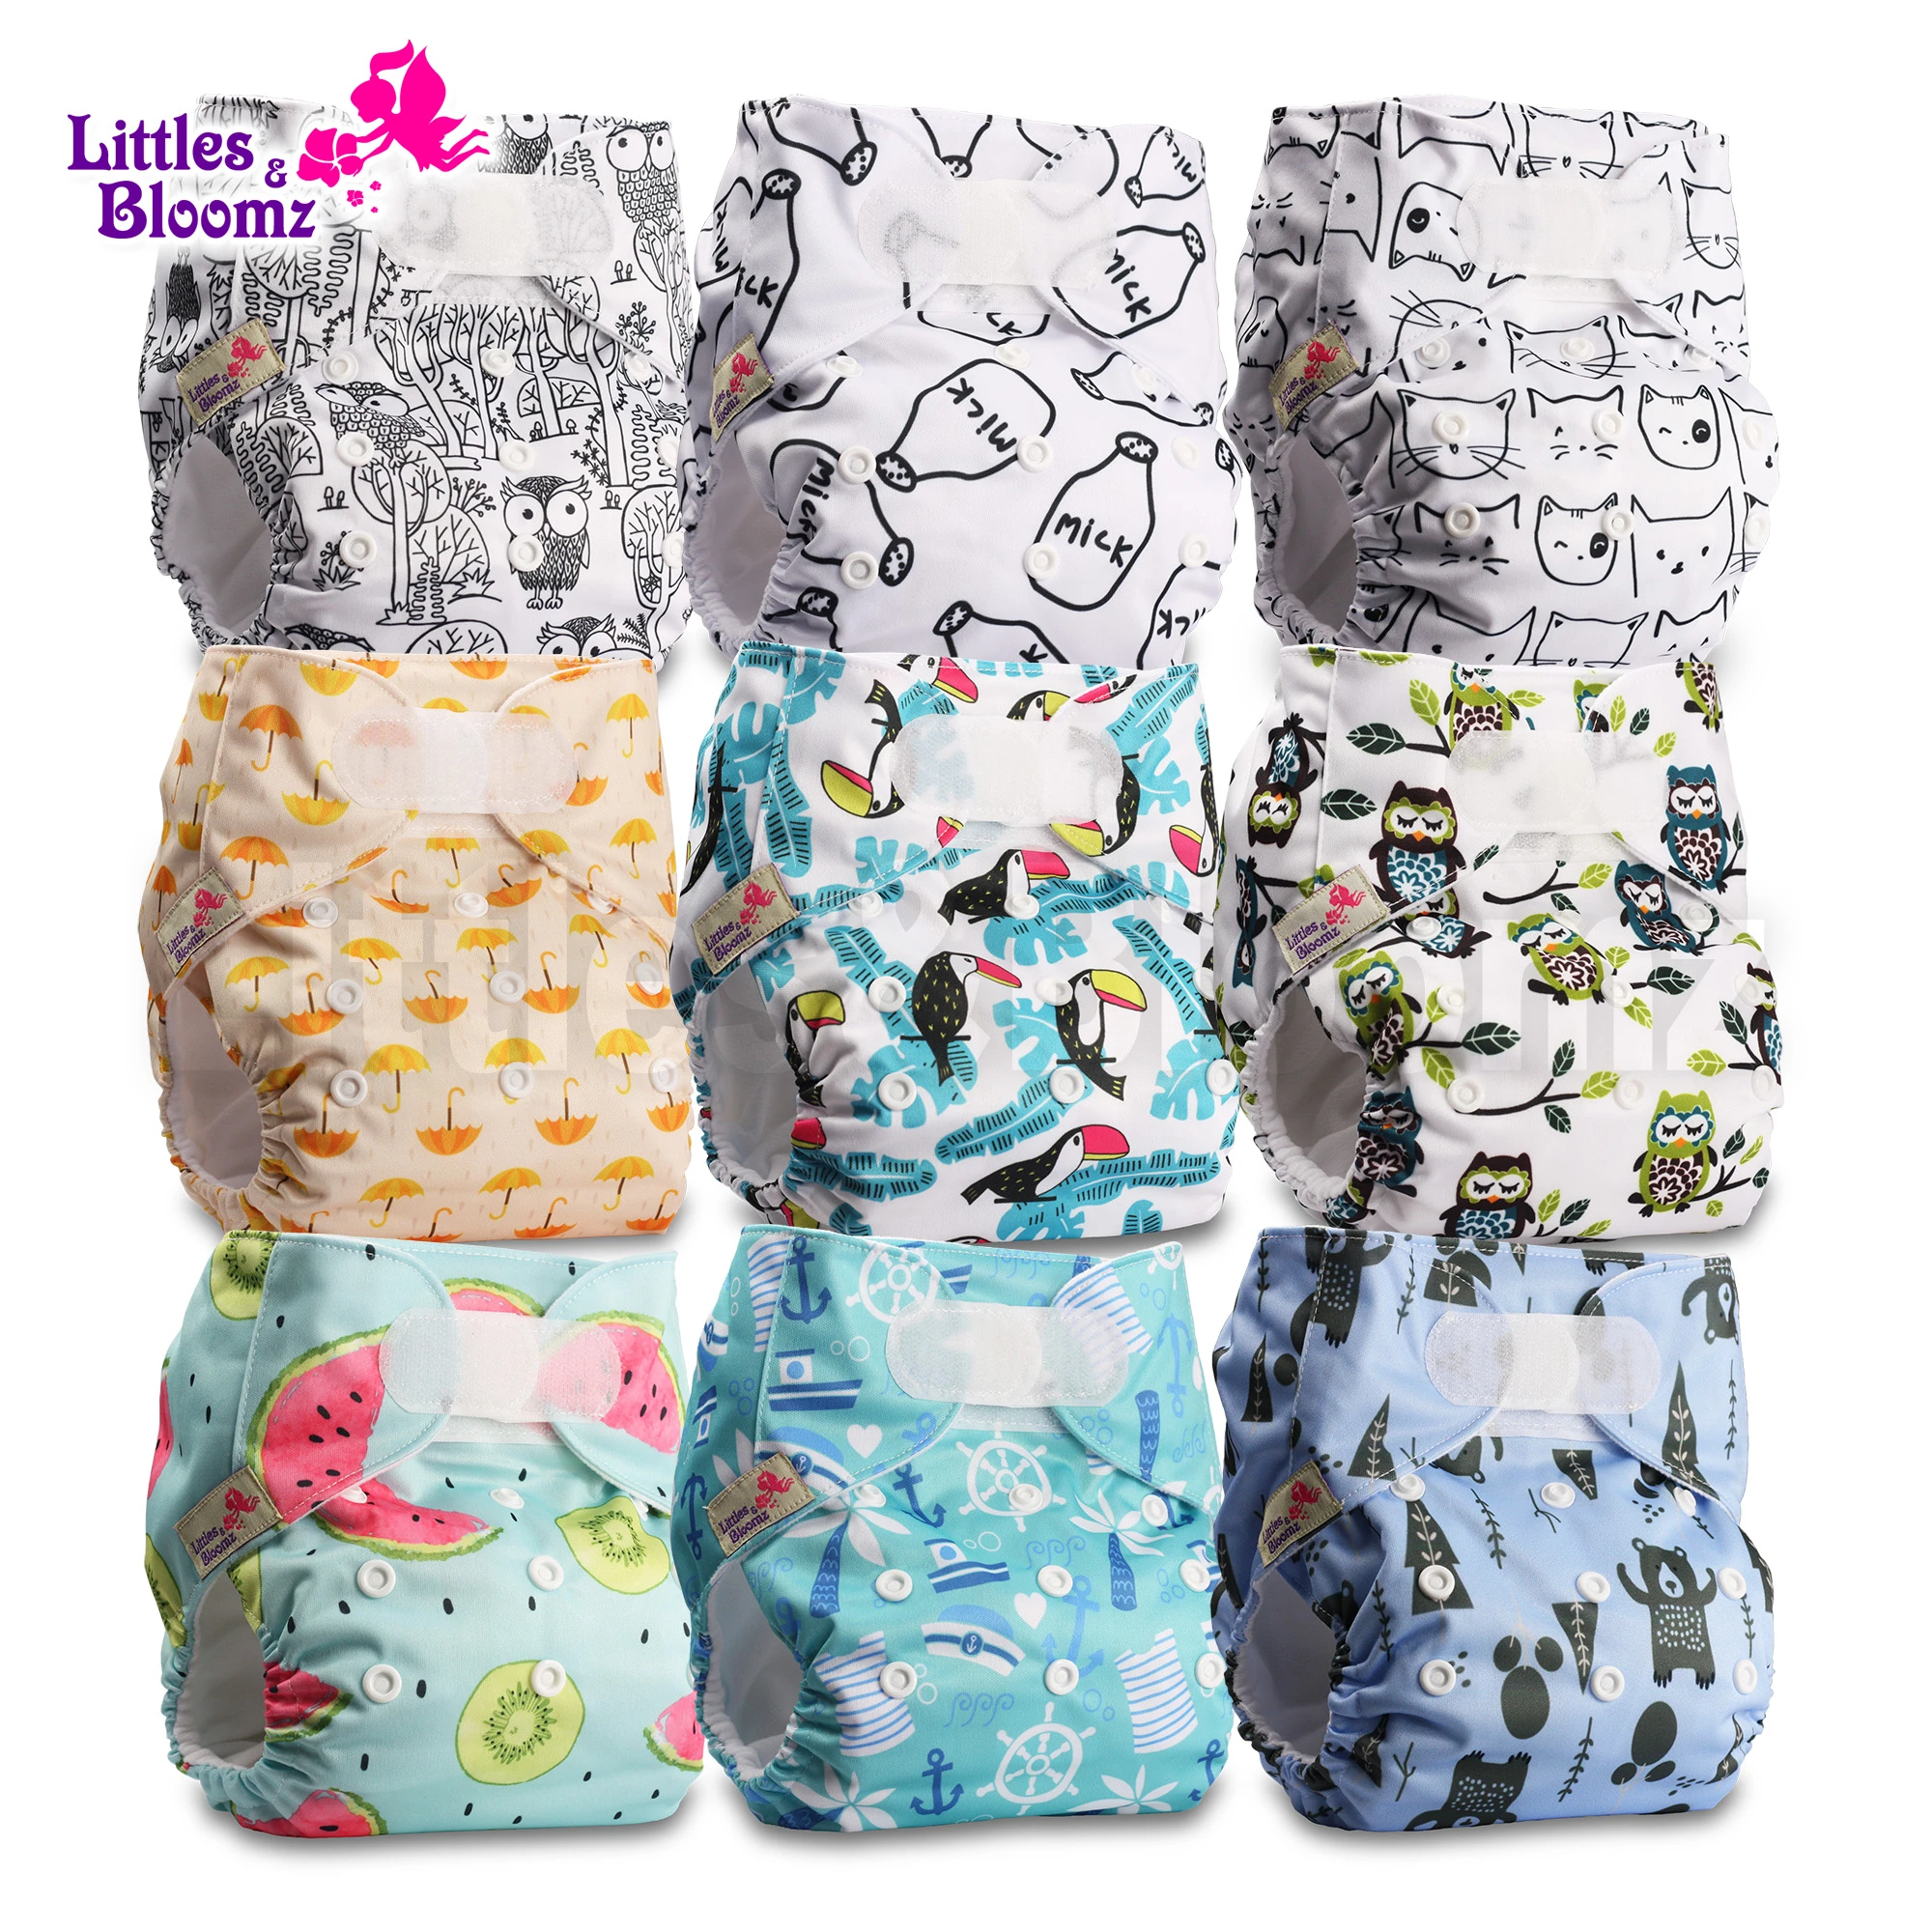 [Littles&Bloomz]9pcs/set STANDARD Hook-Loop Reusable Washable Real Cloth Nappy Diaper,9 nappies/diapers and 0 inserts in one set